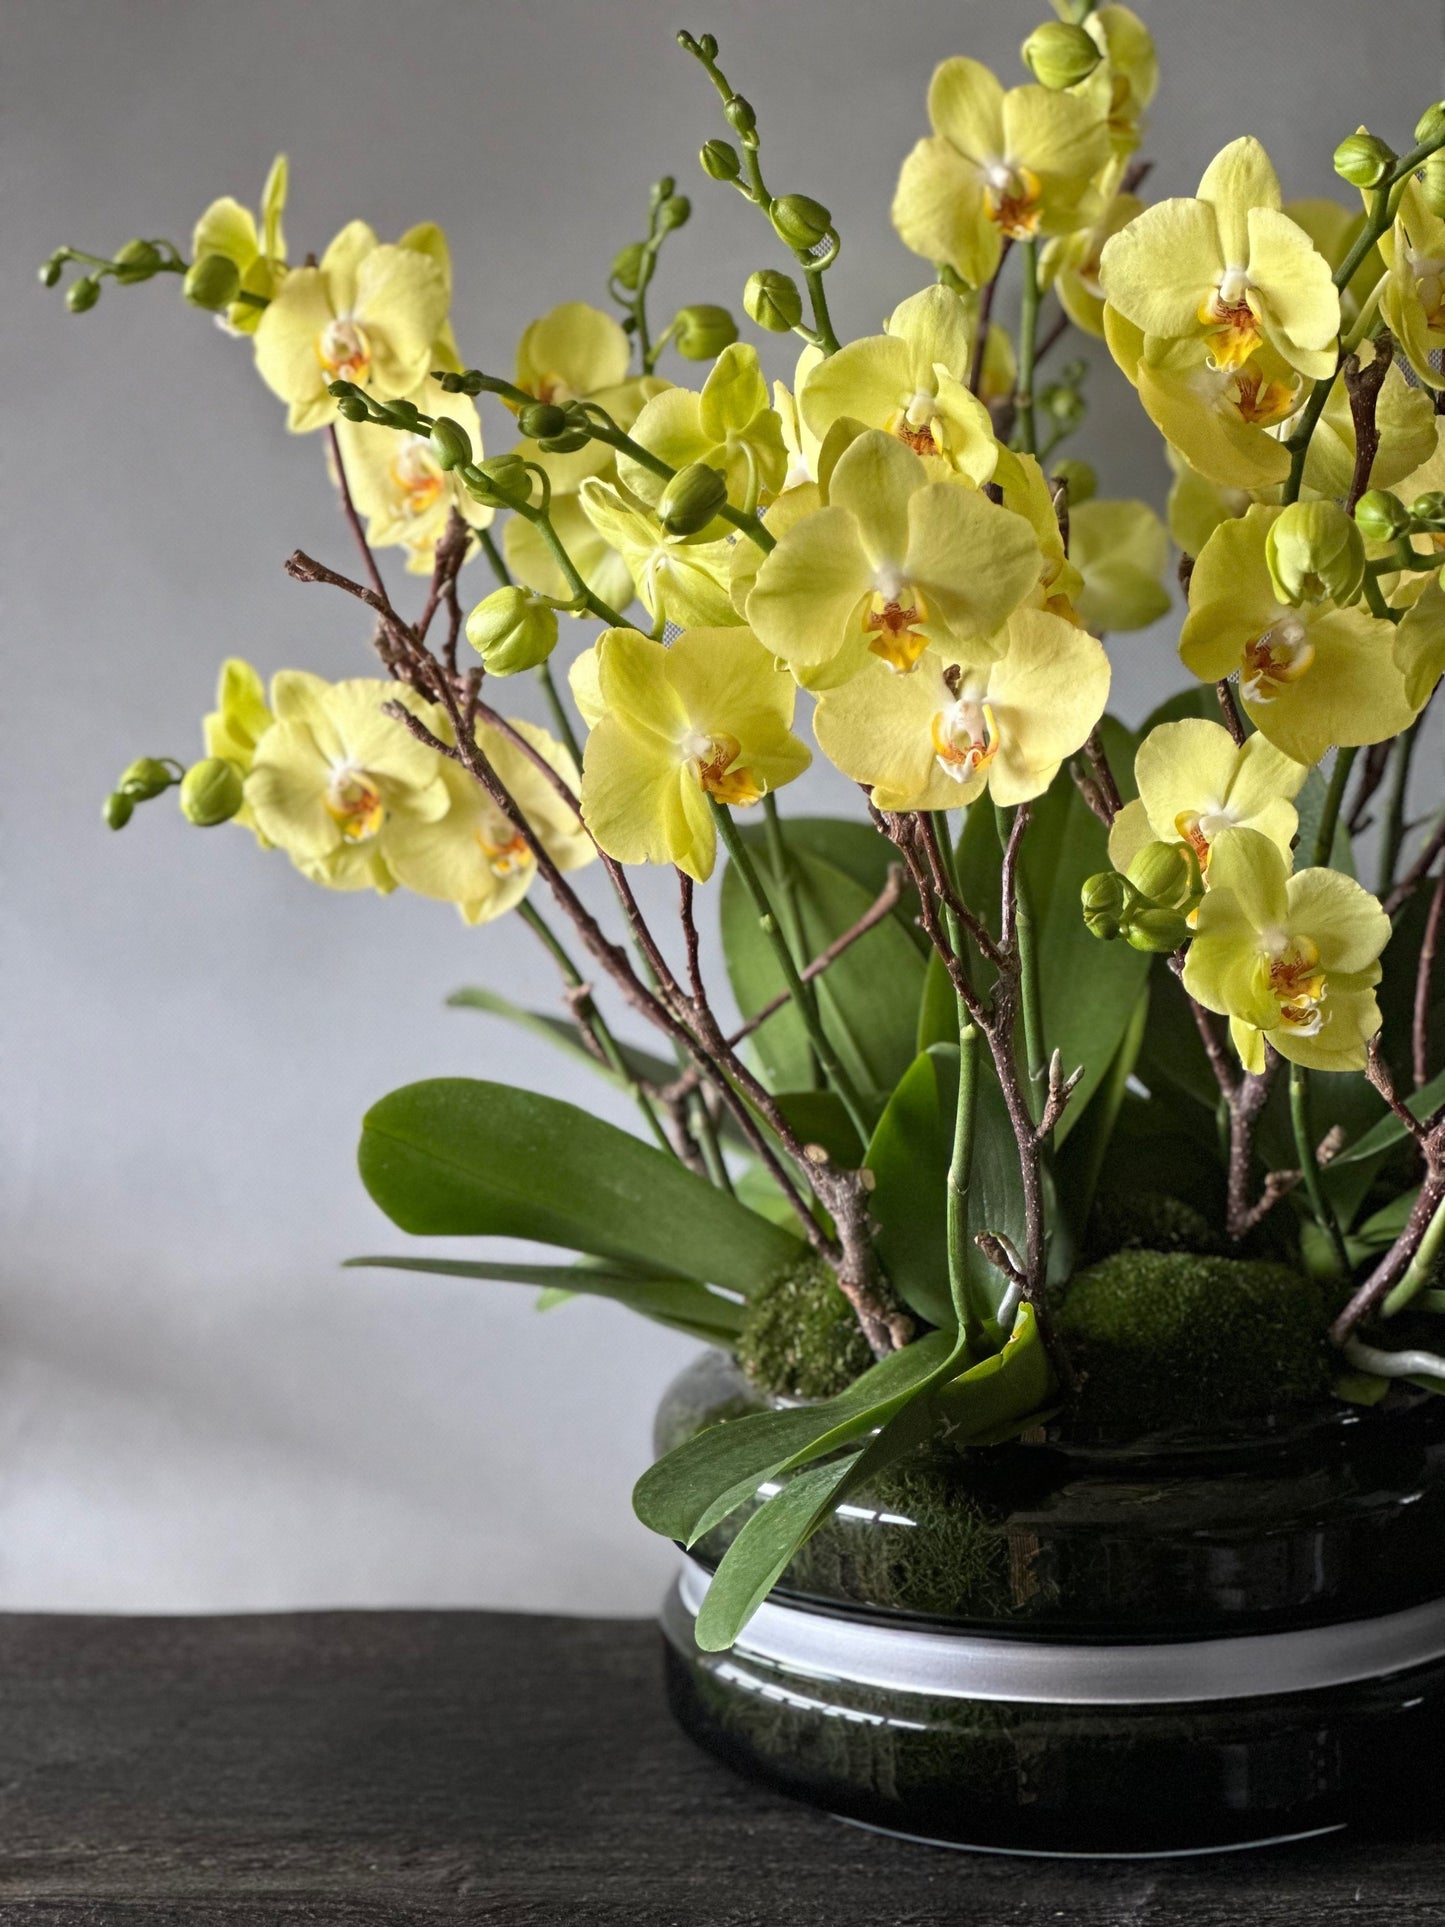 Signature Orchids - Yellow - Pulbrook & Gould Flowers London